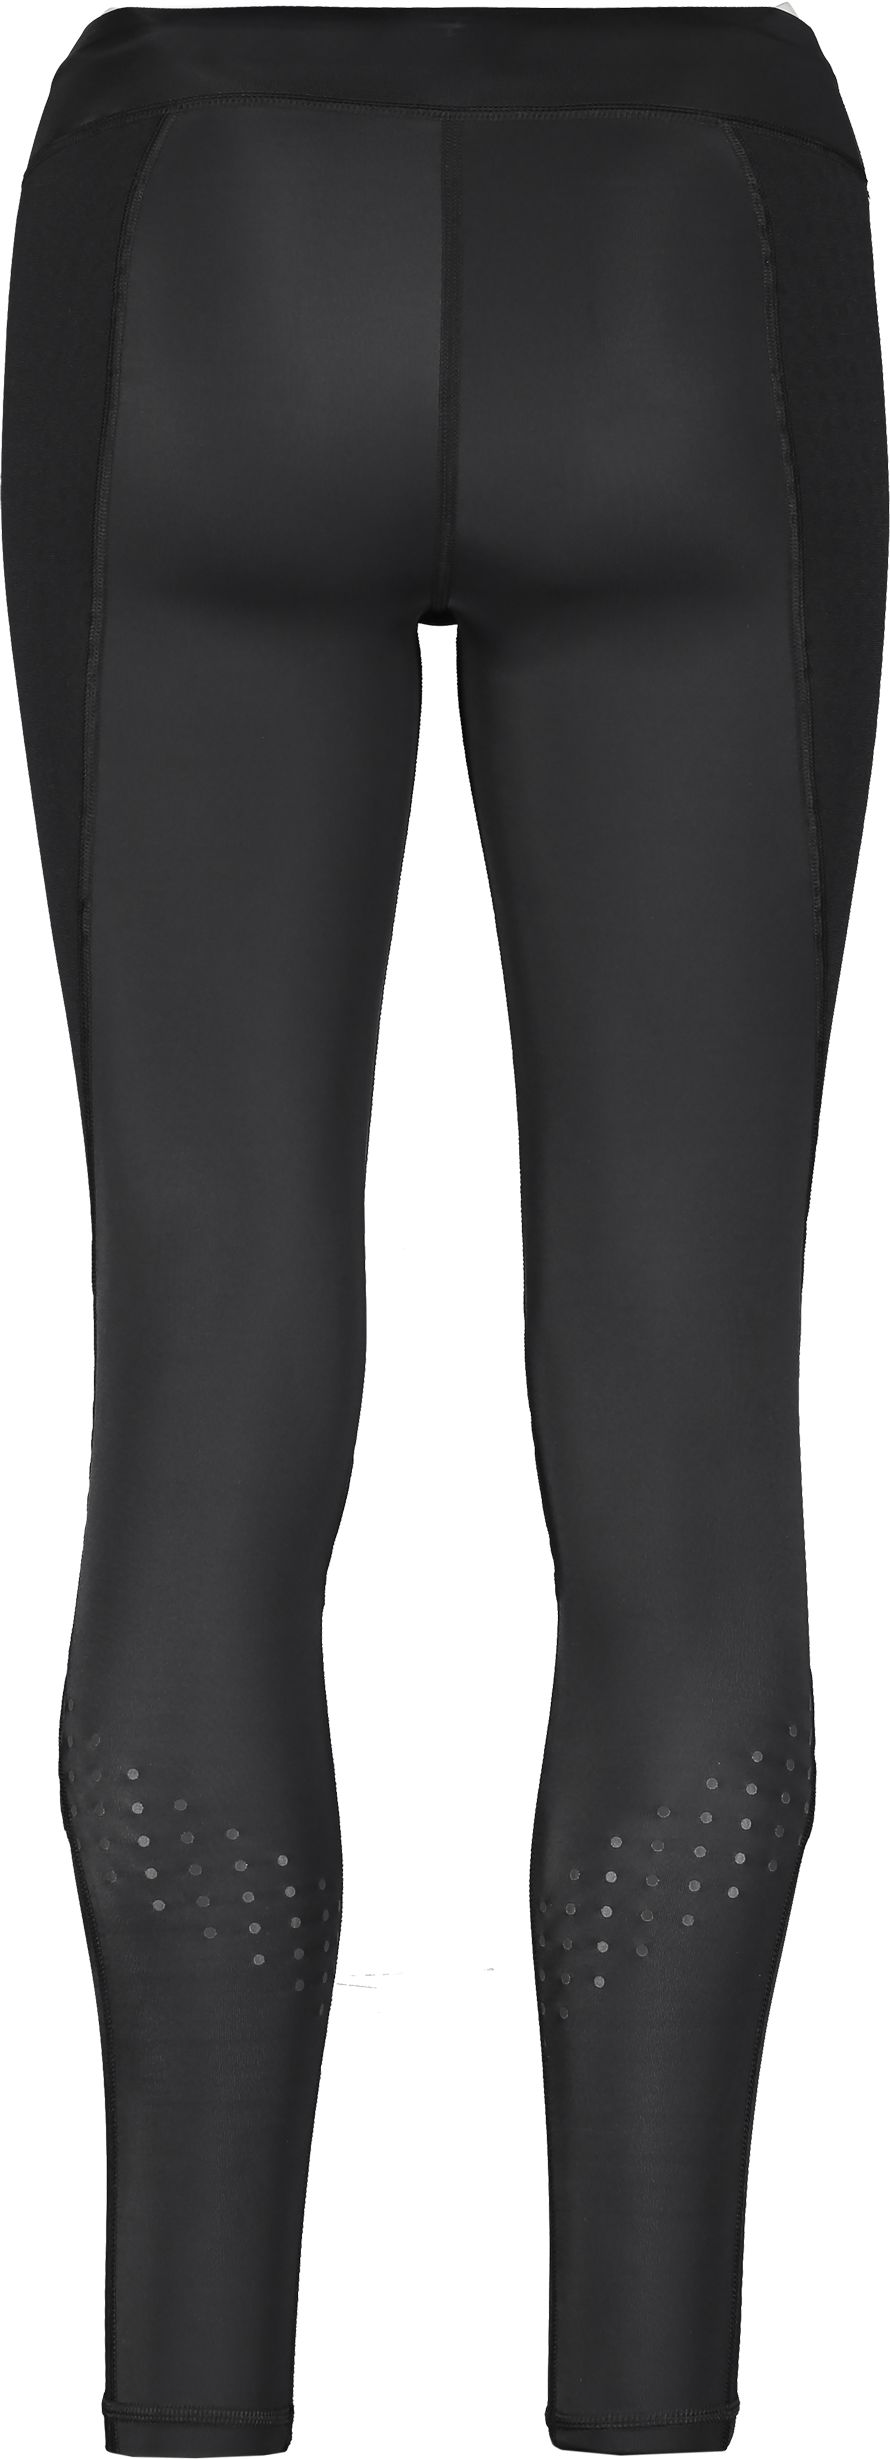 REHBAND, RUNNERS KNEE ITBS TIGHTS